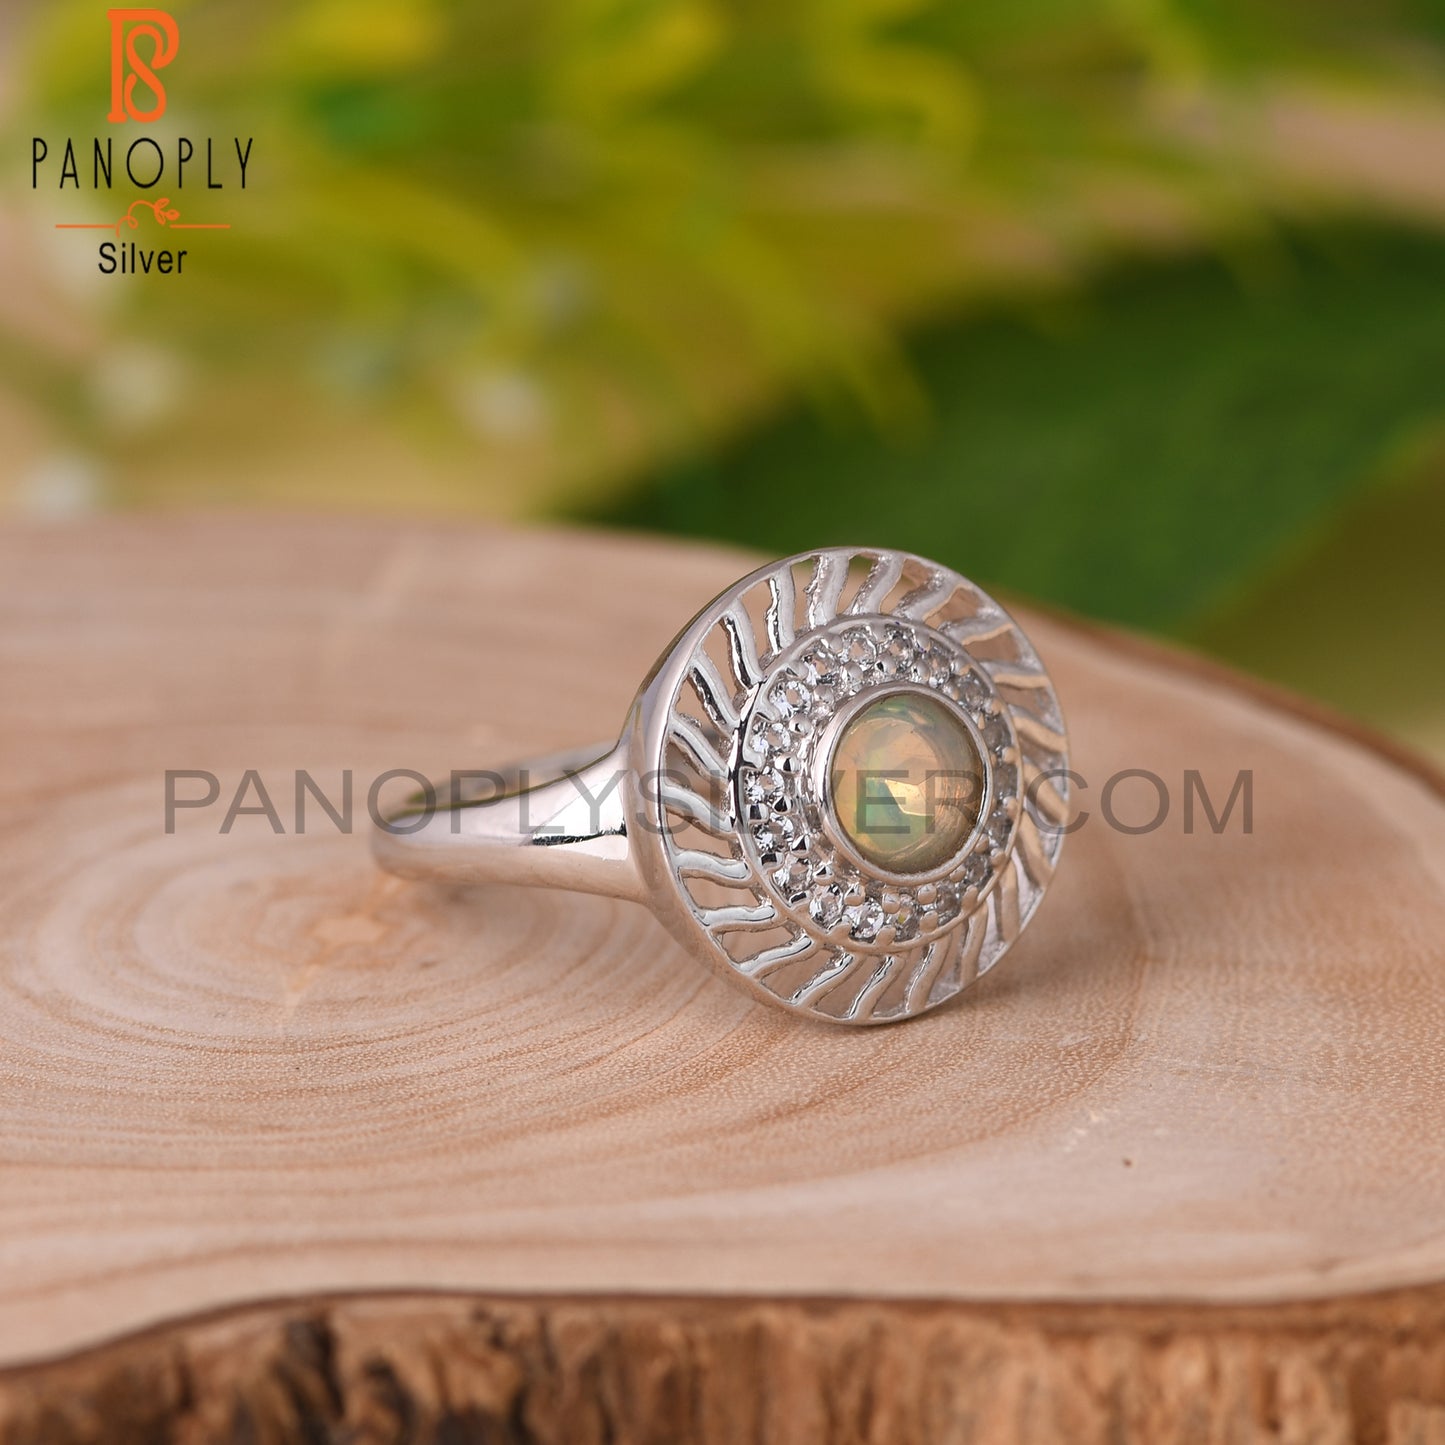 Ethiopian Opal & White Topaz Round 925 Sterling Silver Ring